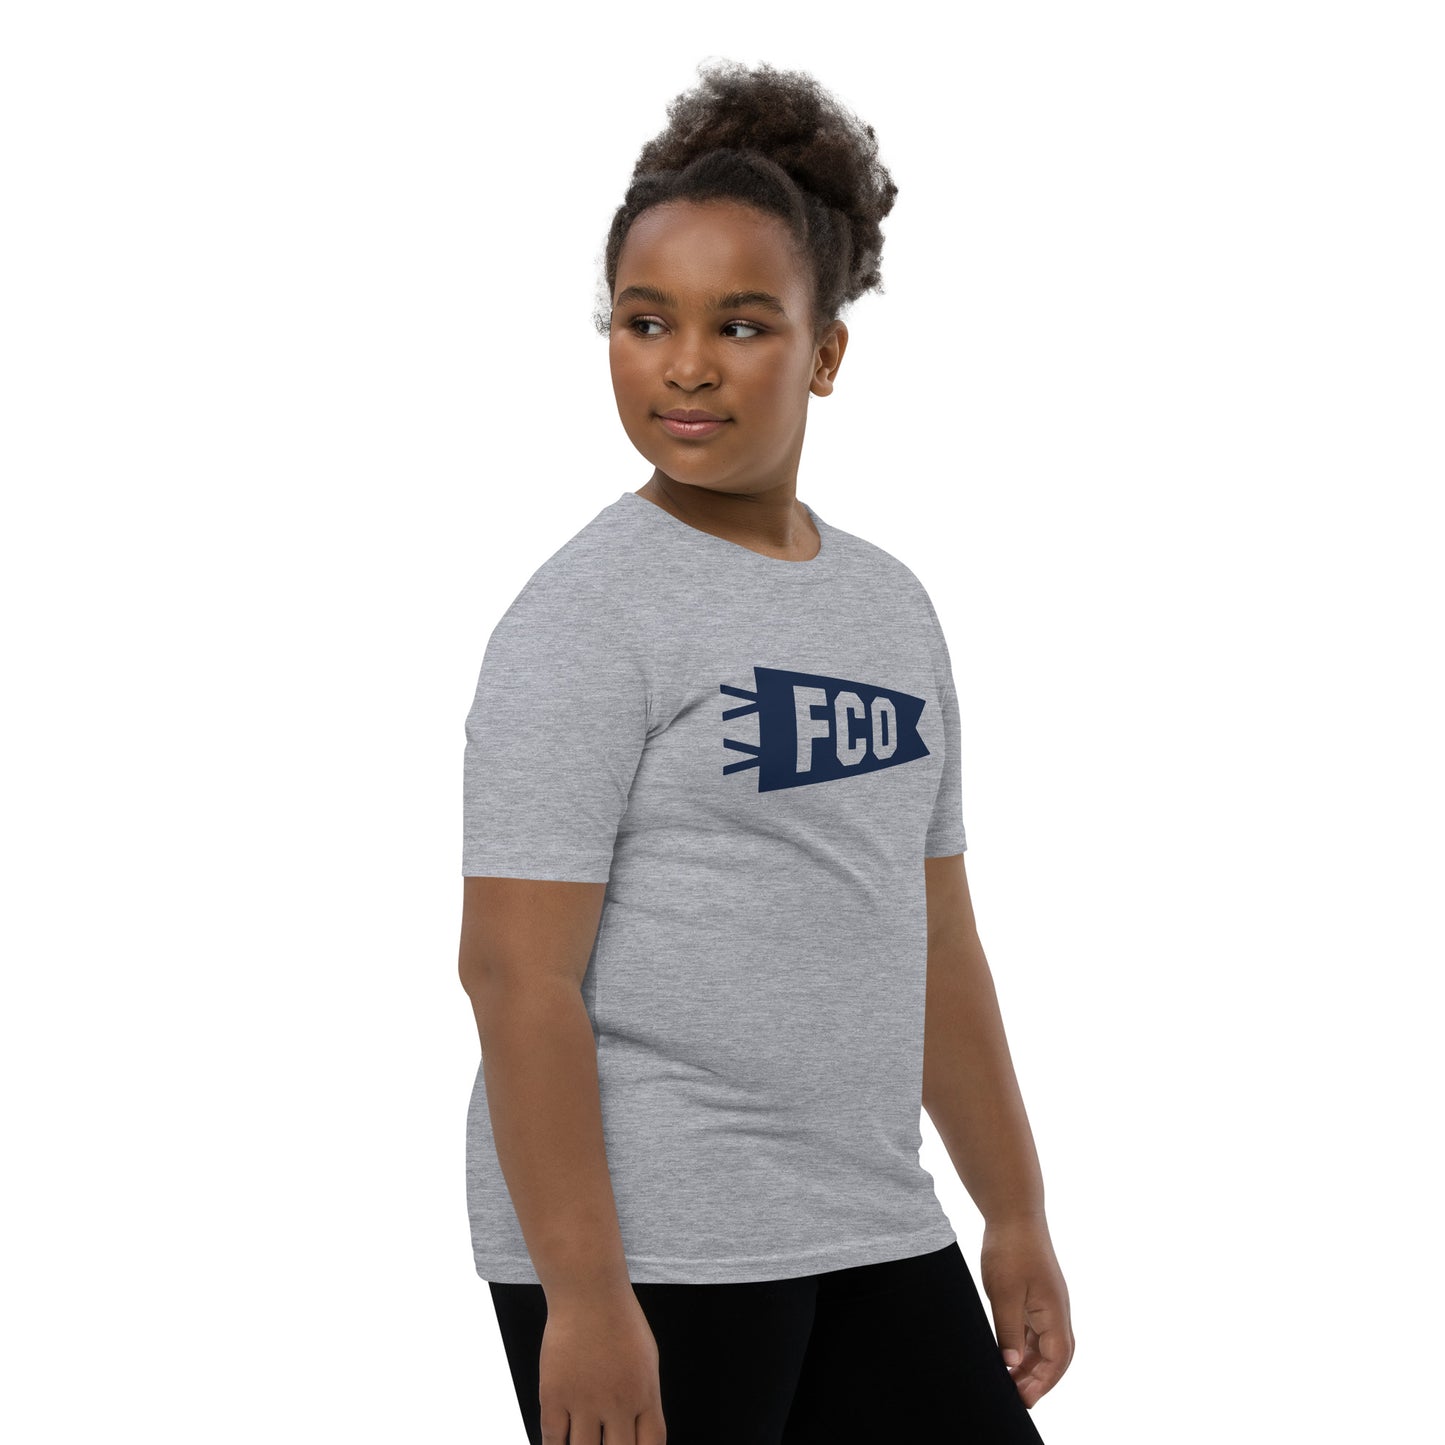 Kid's Airport Code Tee - Navy Blue Graphic • FCO Rome • YHM Designs - Image 03